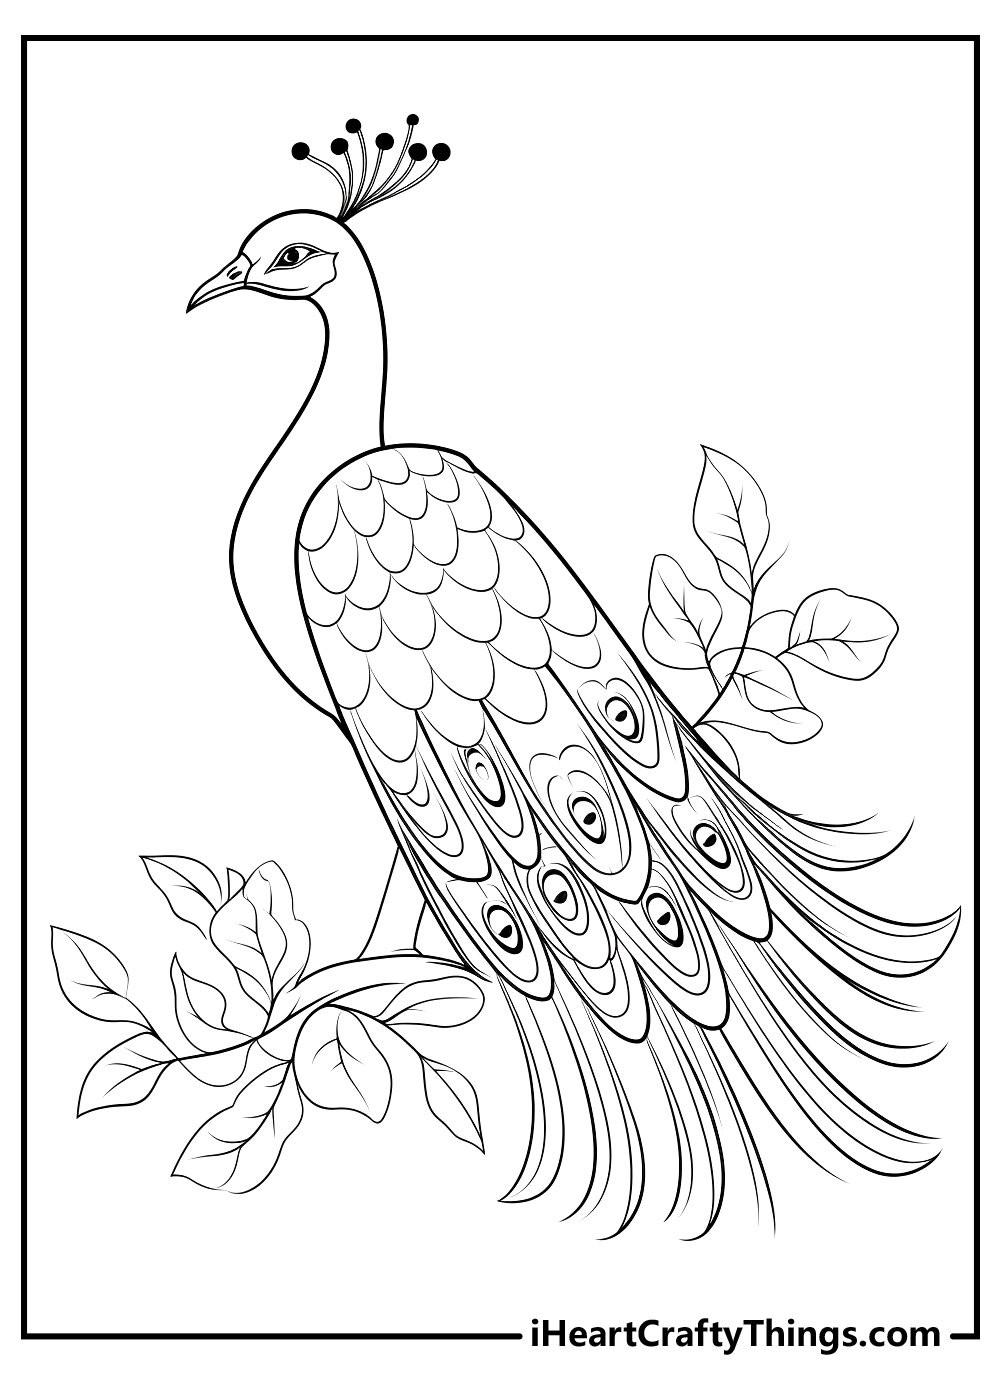 Peacocks coloring pages free printables